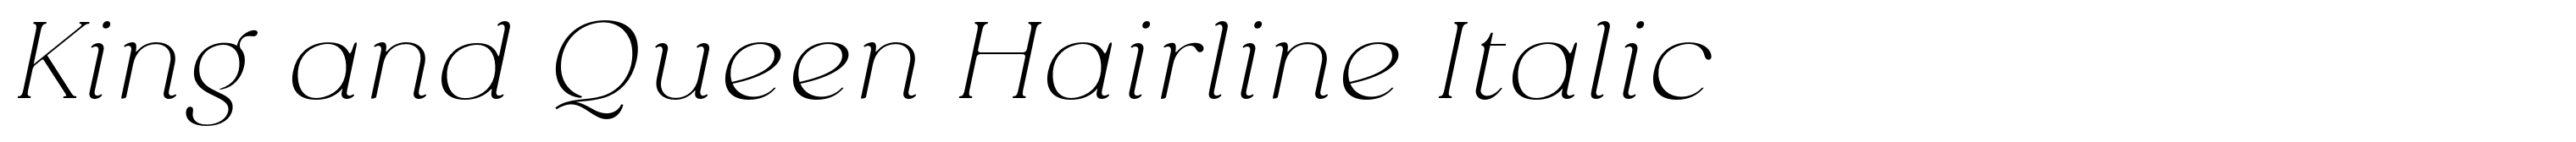 King and Queen Hairline Italic